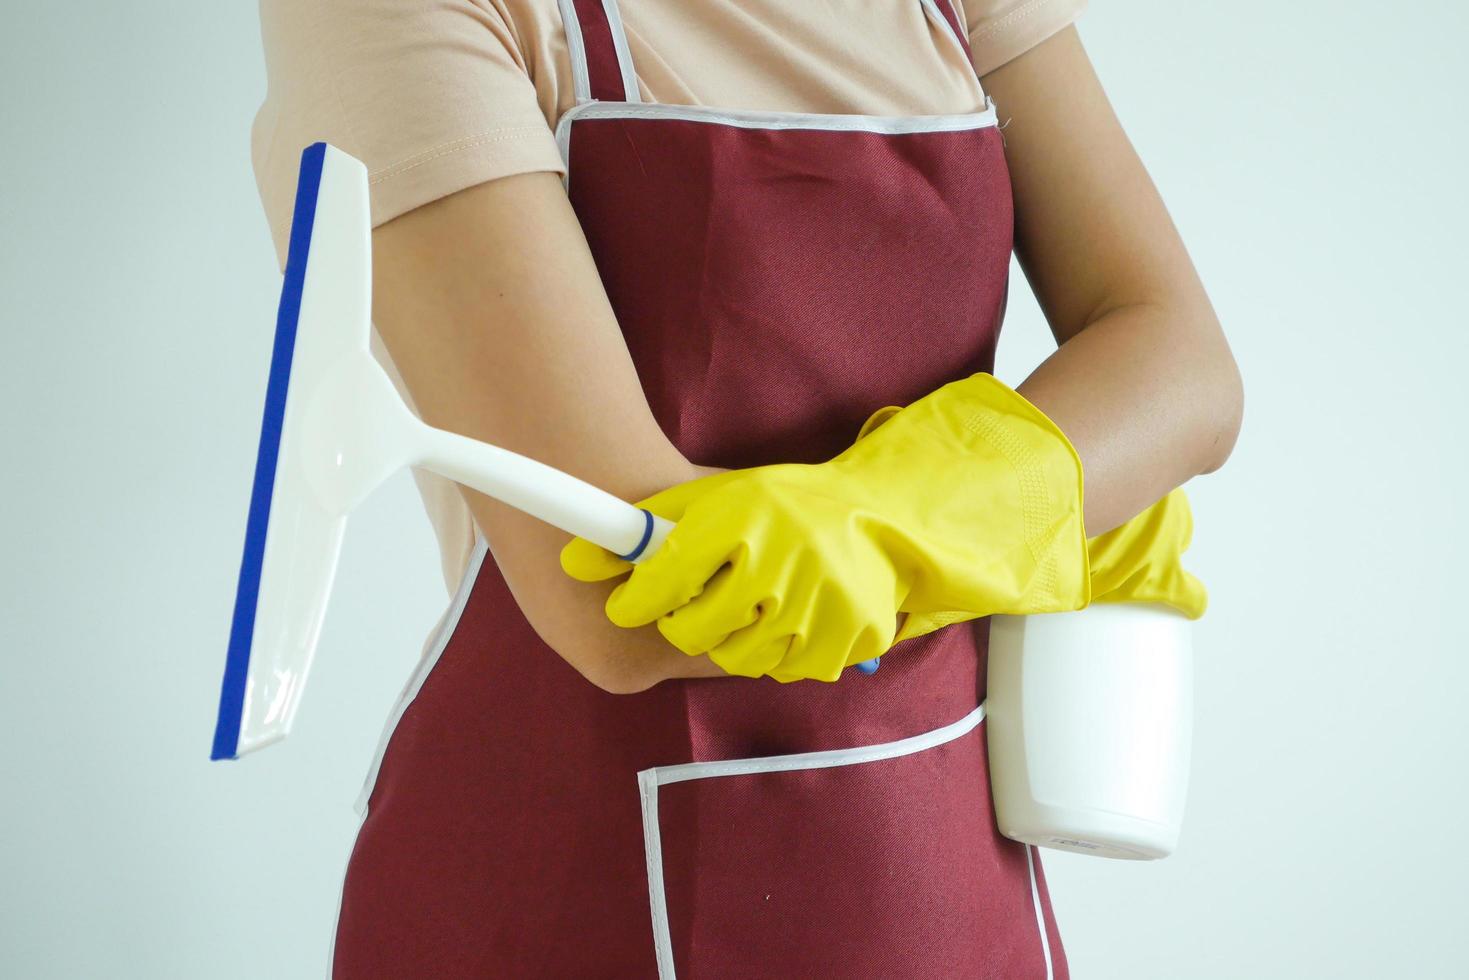 Women carrying house cleaning equipment by wearing rubber gloves. photo